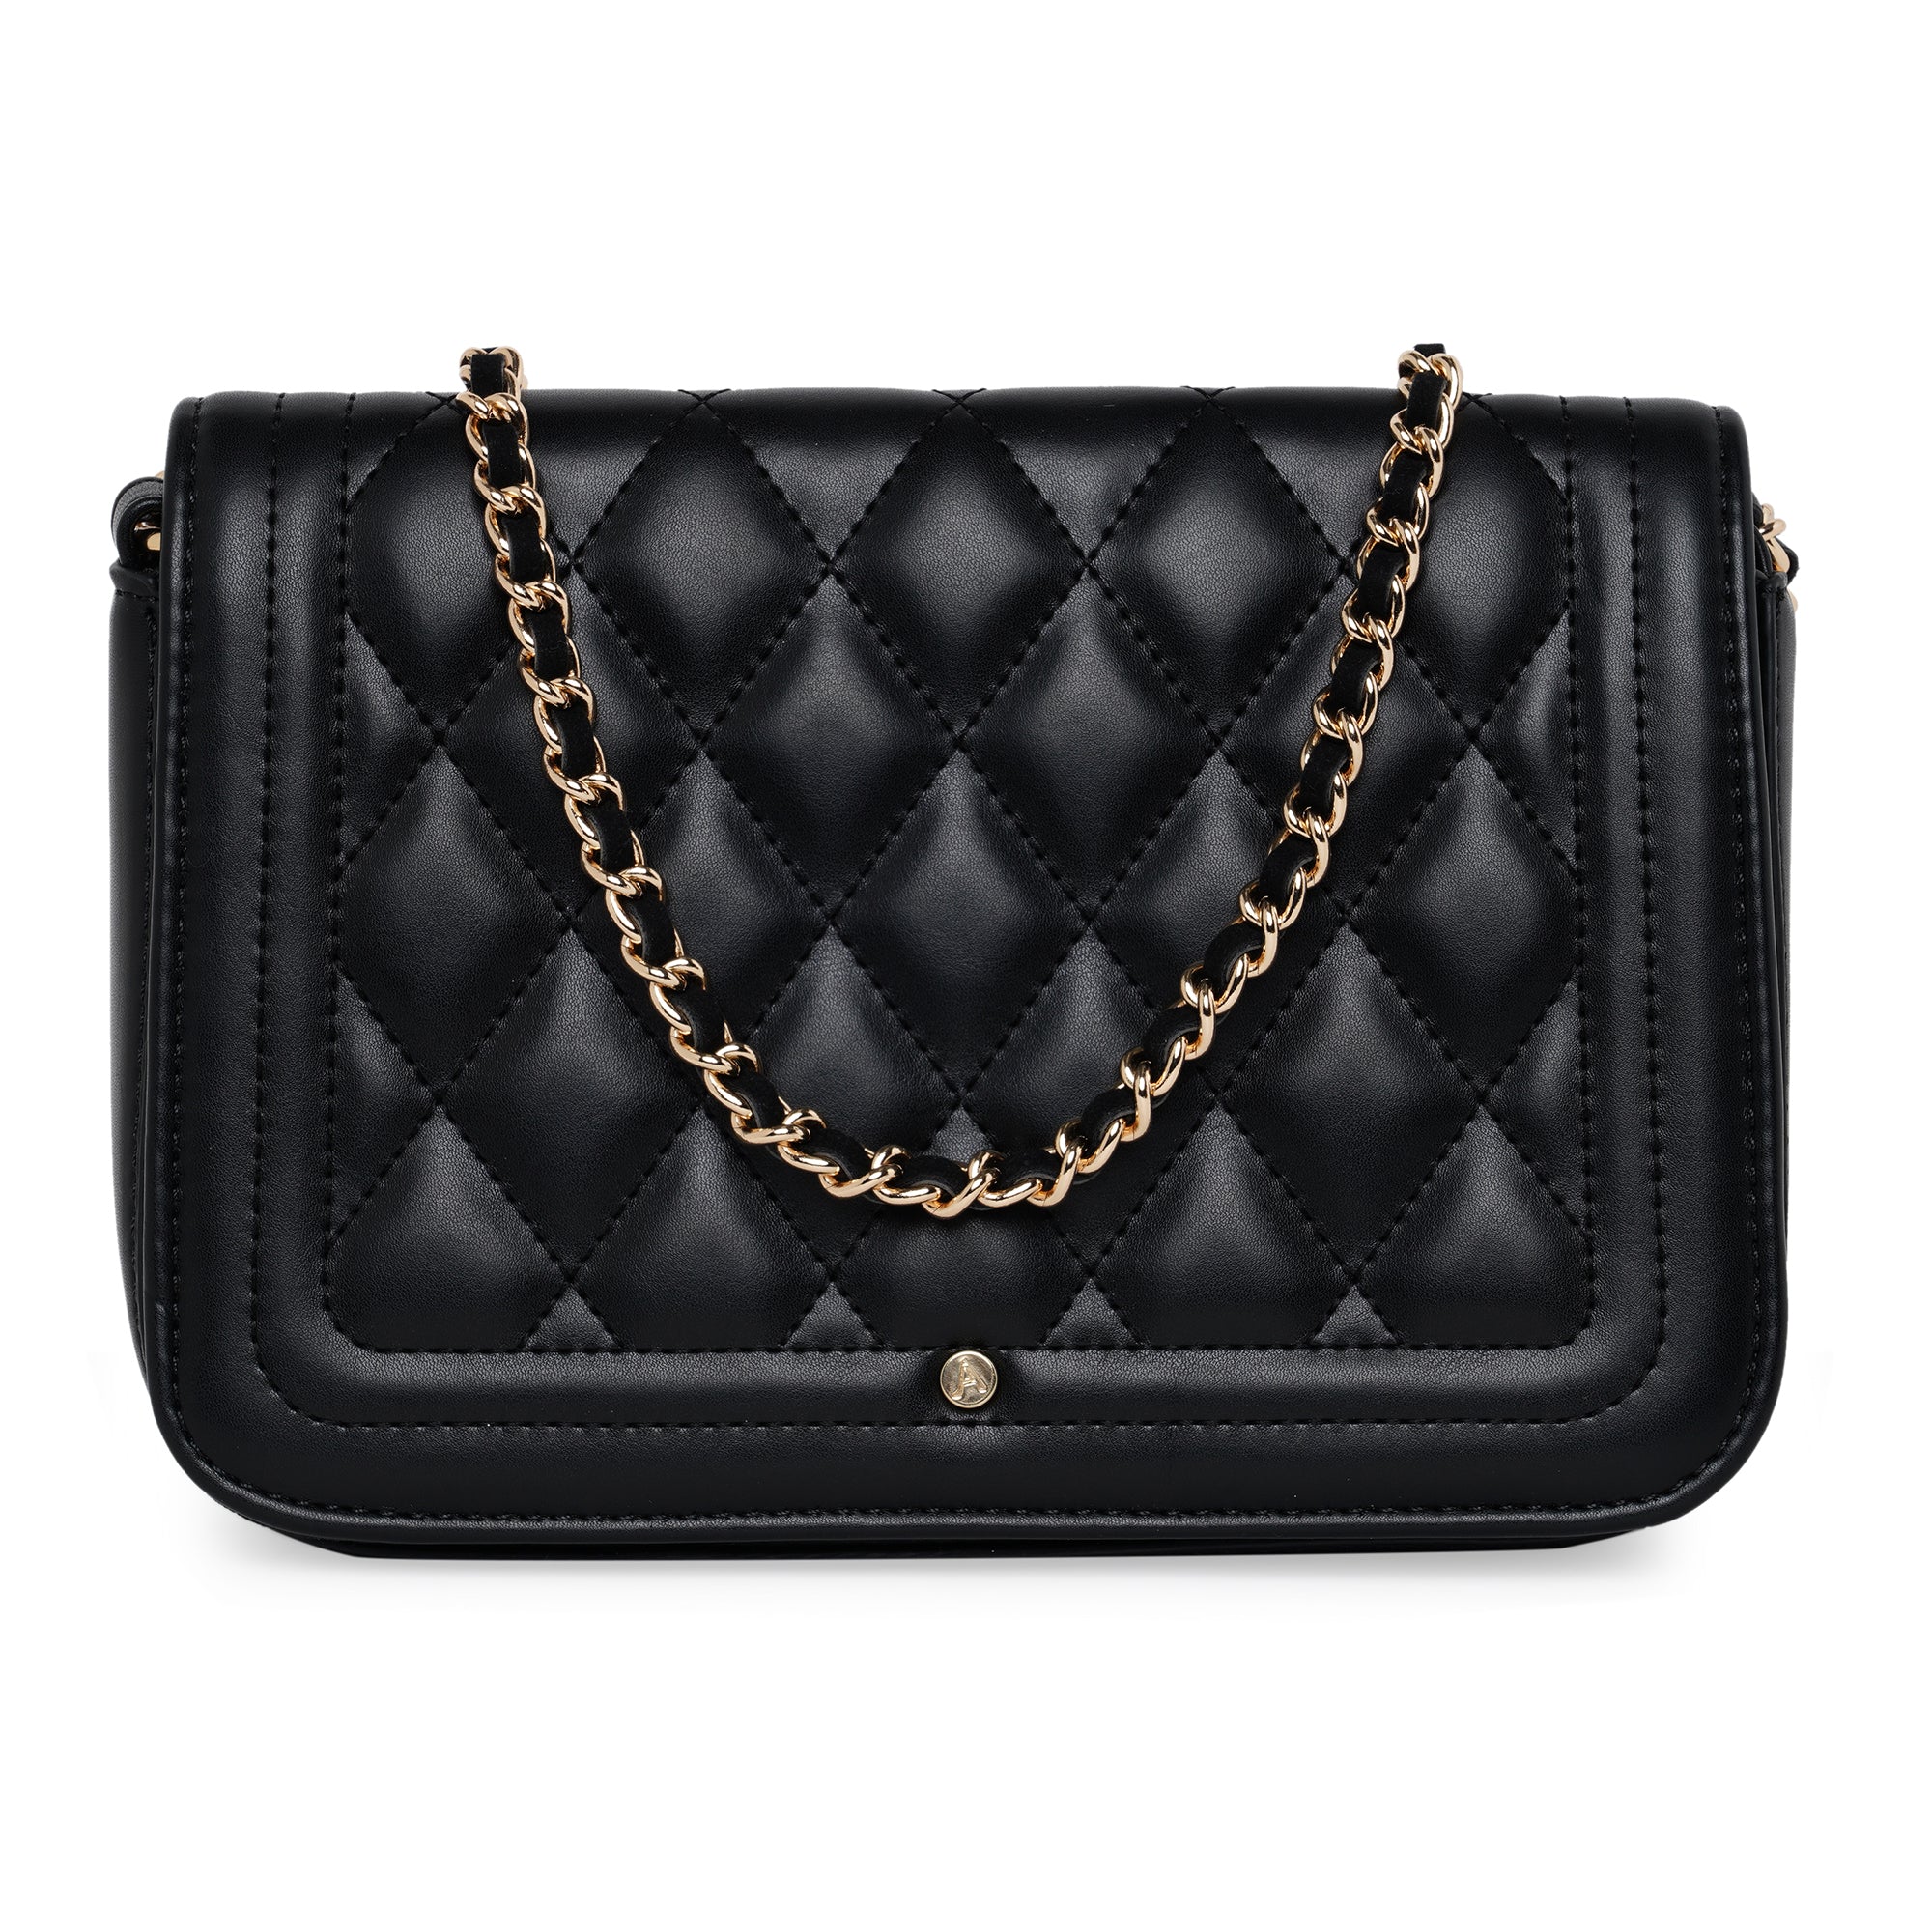 Accessorize London Women's Faux Leather Black Chryssa Quilted Sling Bag